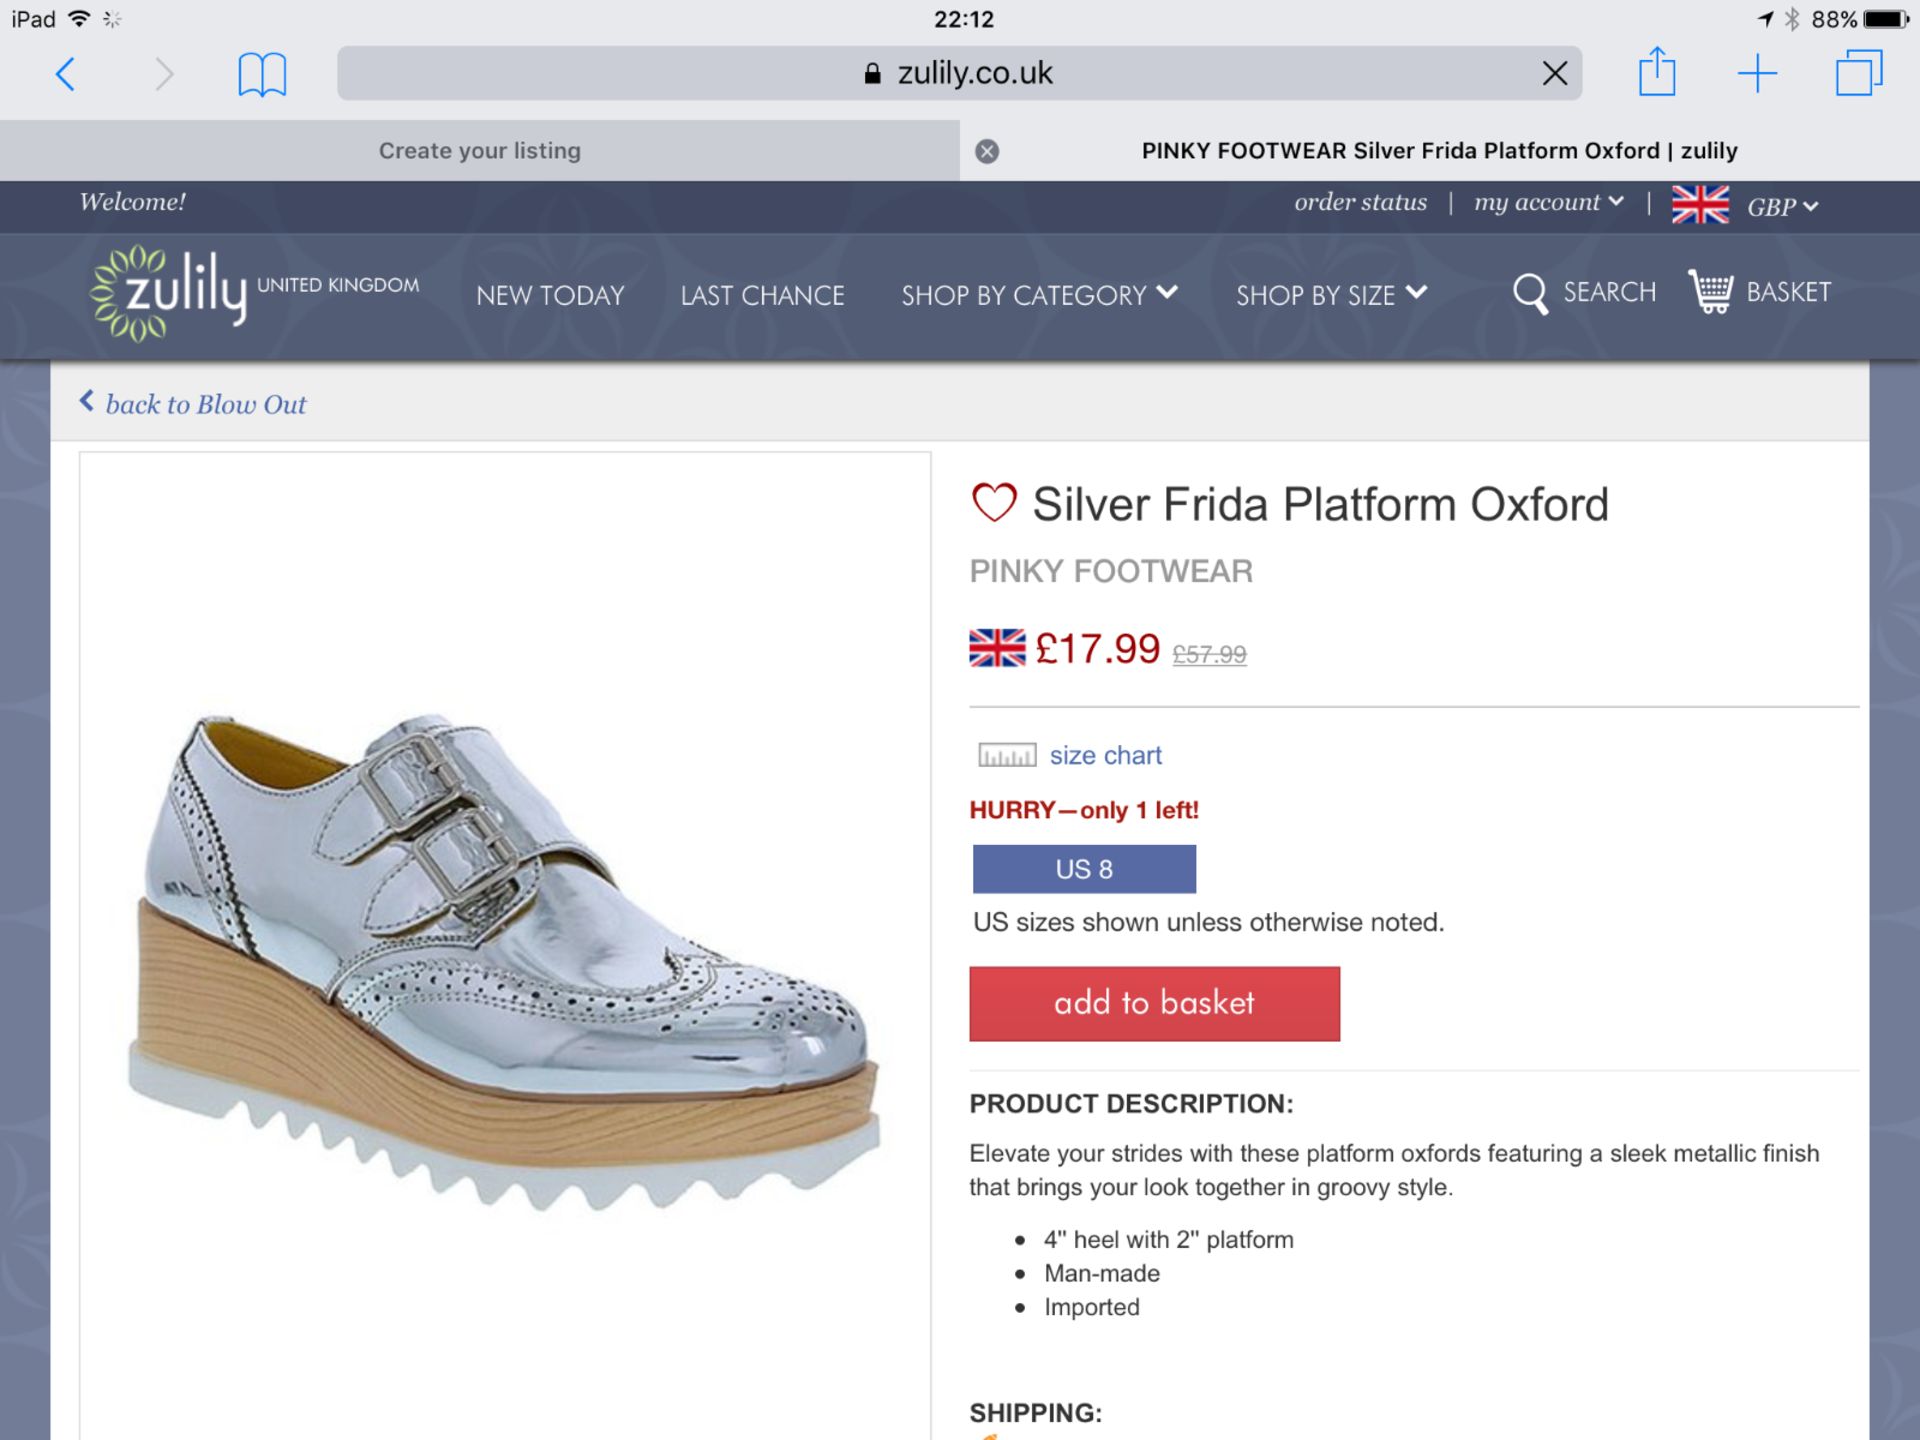 PINKY FOOTWEAR Silver Frida Platform Oxford, Size US 10/Eur 40/UK 7, RRP £57.99 (New with box) [Ref: - Image 3 of 4